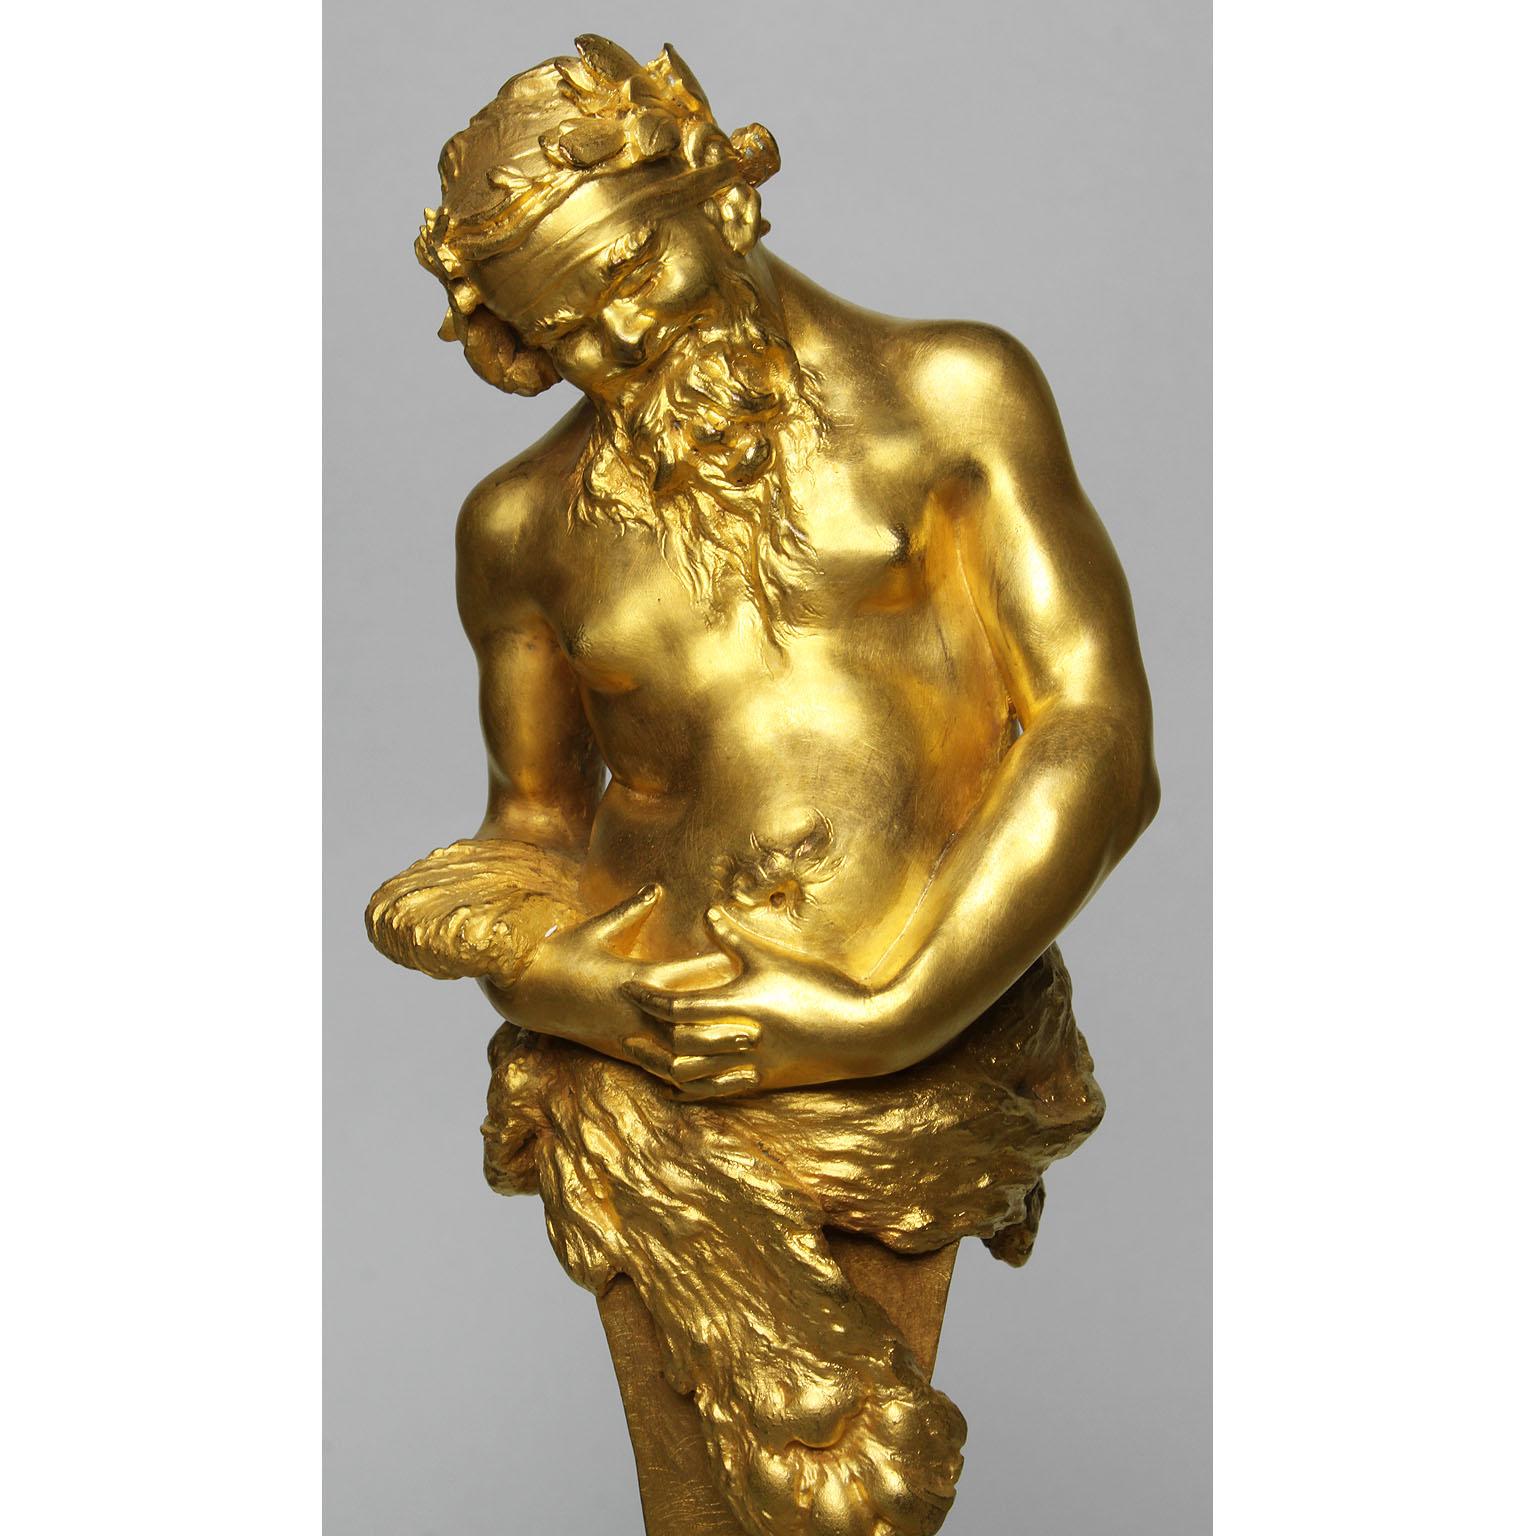 Cipri Adolf Bermann (German, 1862-1942) a very fine 19th century gilt-bronze miniature figure of a Bacchus Herm, depicting Bacchus, also known as Dionysus, the god of the grape harvest, wine making and wine in Greek Mythology, raised on a black